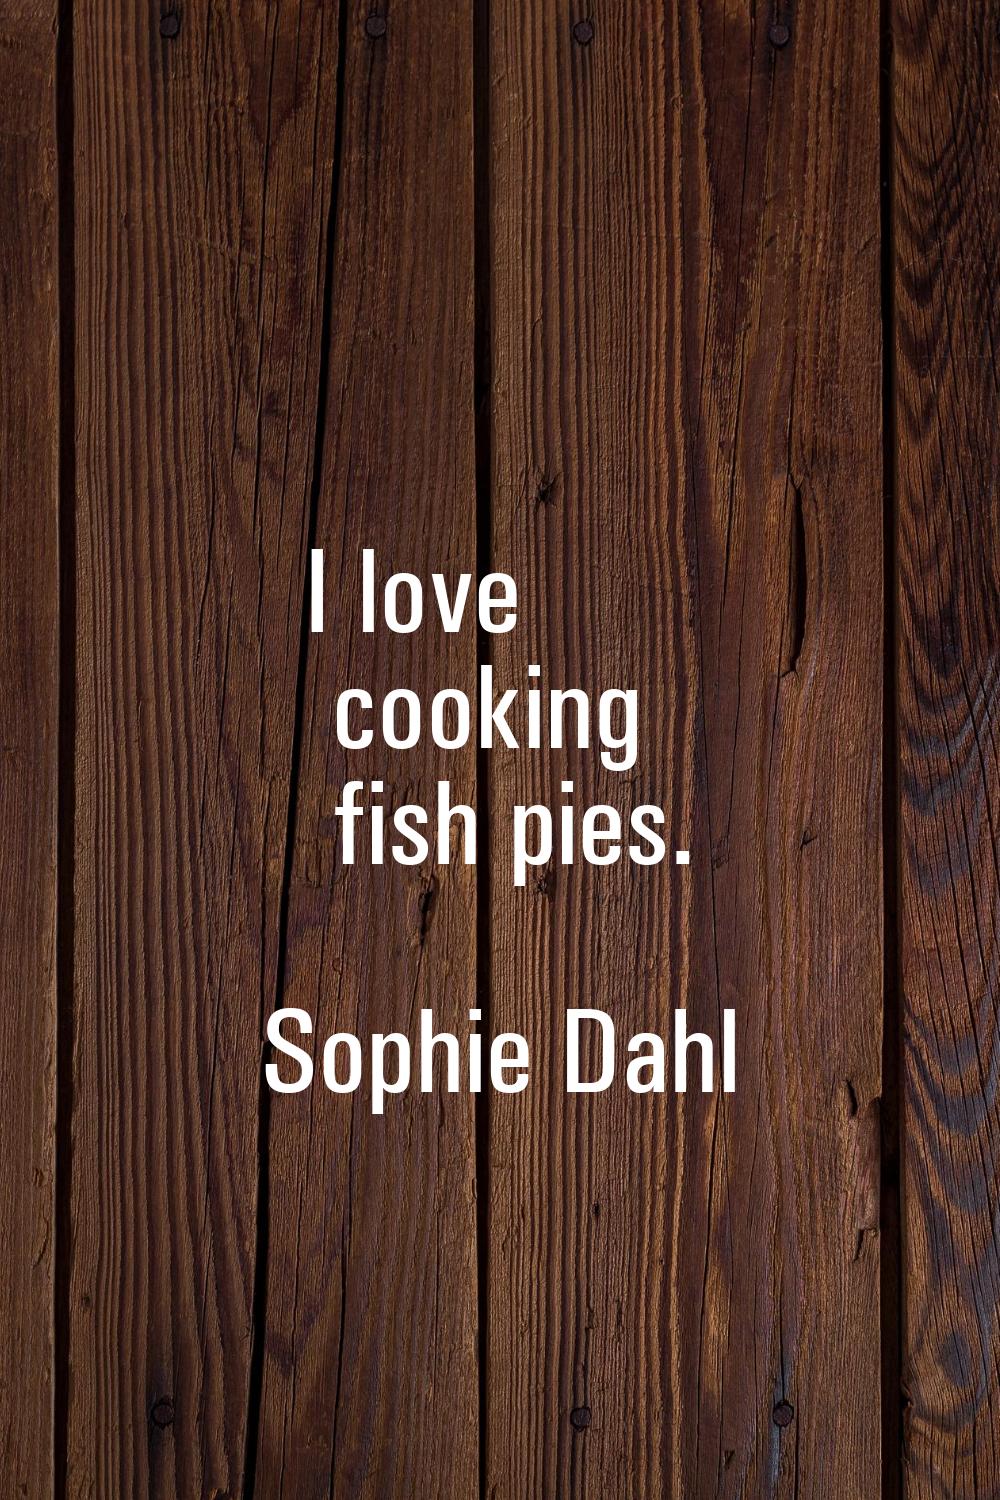 I love cooking fish pies.